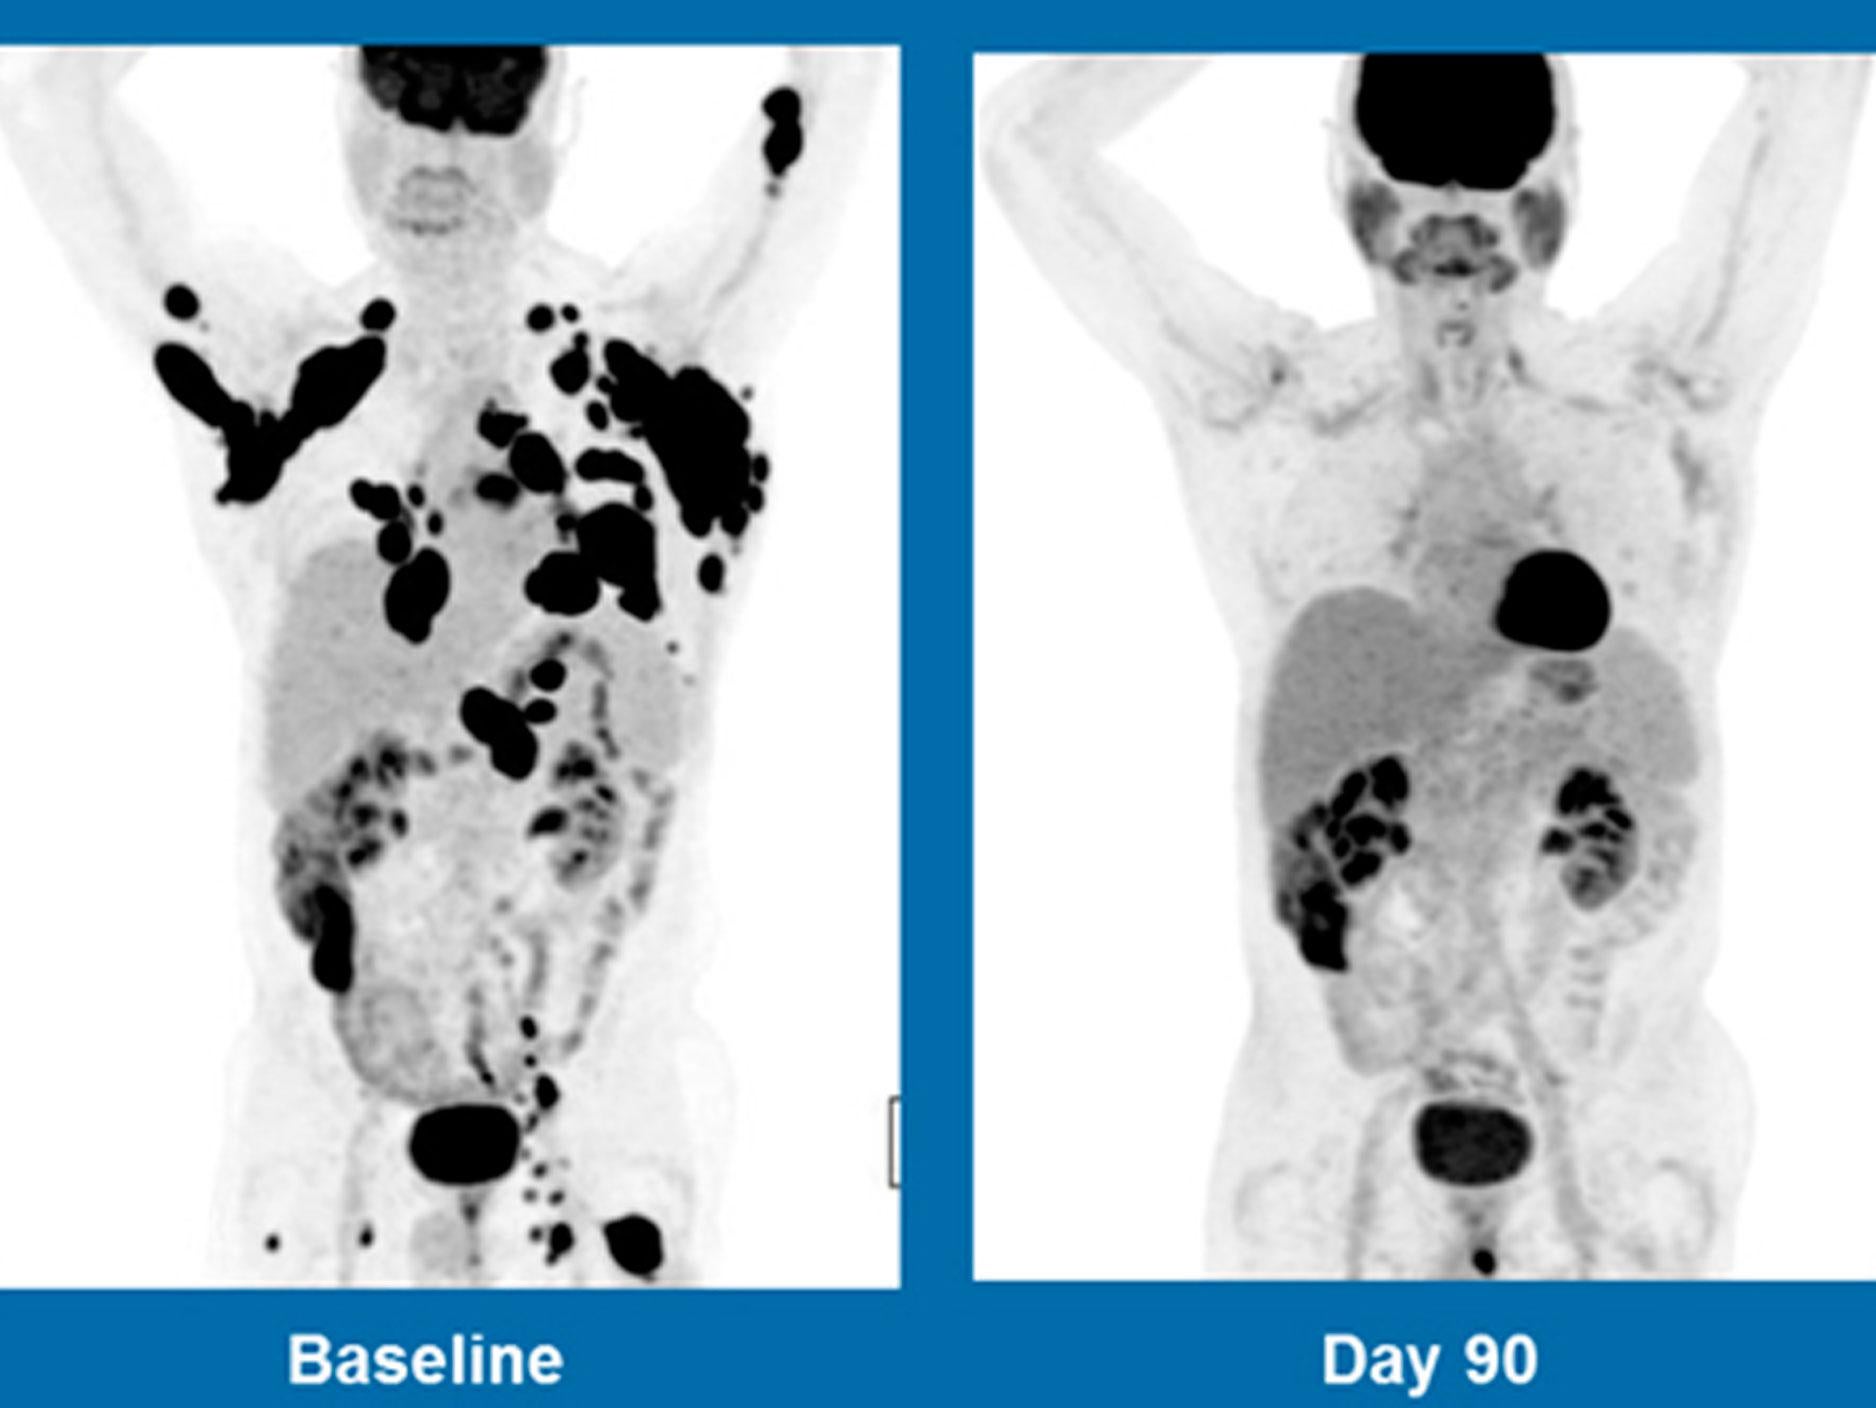 These scans show a 62-year-old man with non-Hodgkin lymphoma. The picture on the left was taken in in December 2015, the one on the right three months after treatment with an experimental gene therapy at the Anderson Cancer Centre in Houston